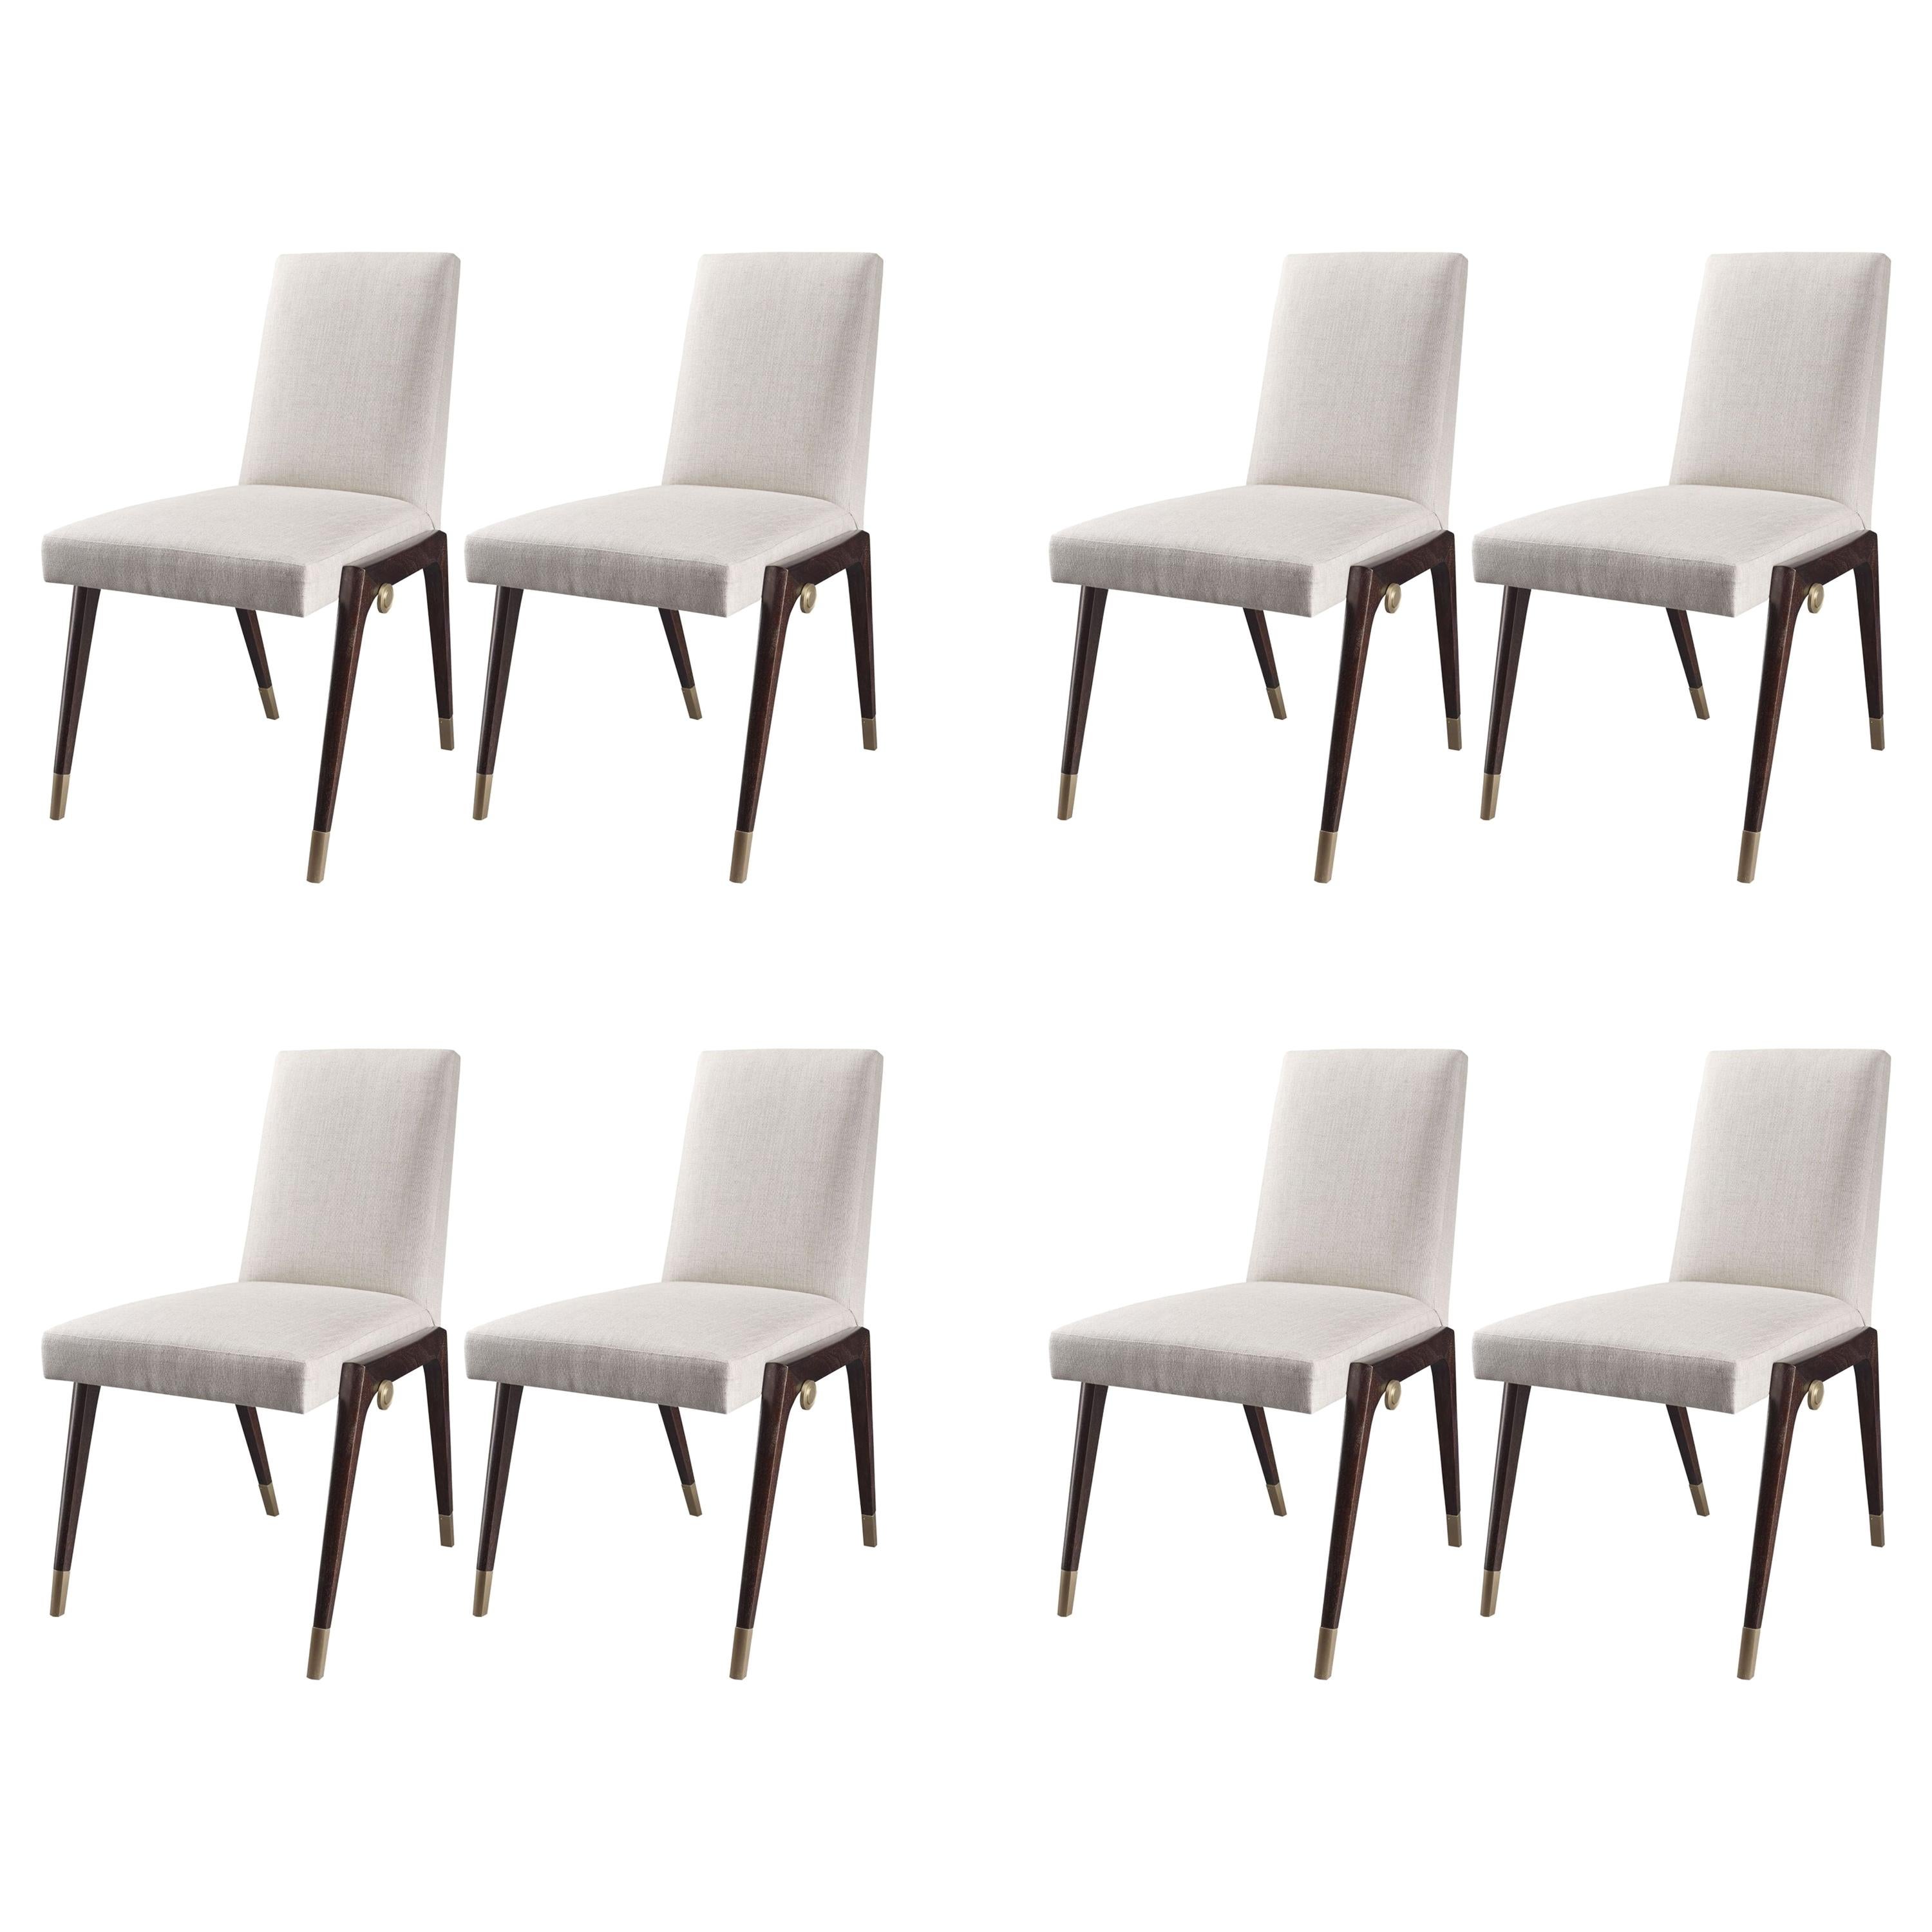 Set of 8 Sling Side Chairs by Thomas Pheasant for Baker